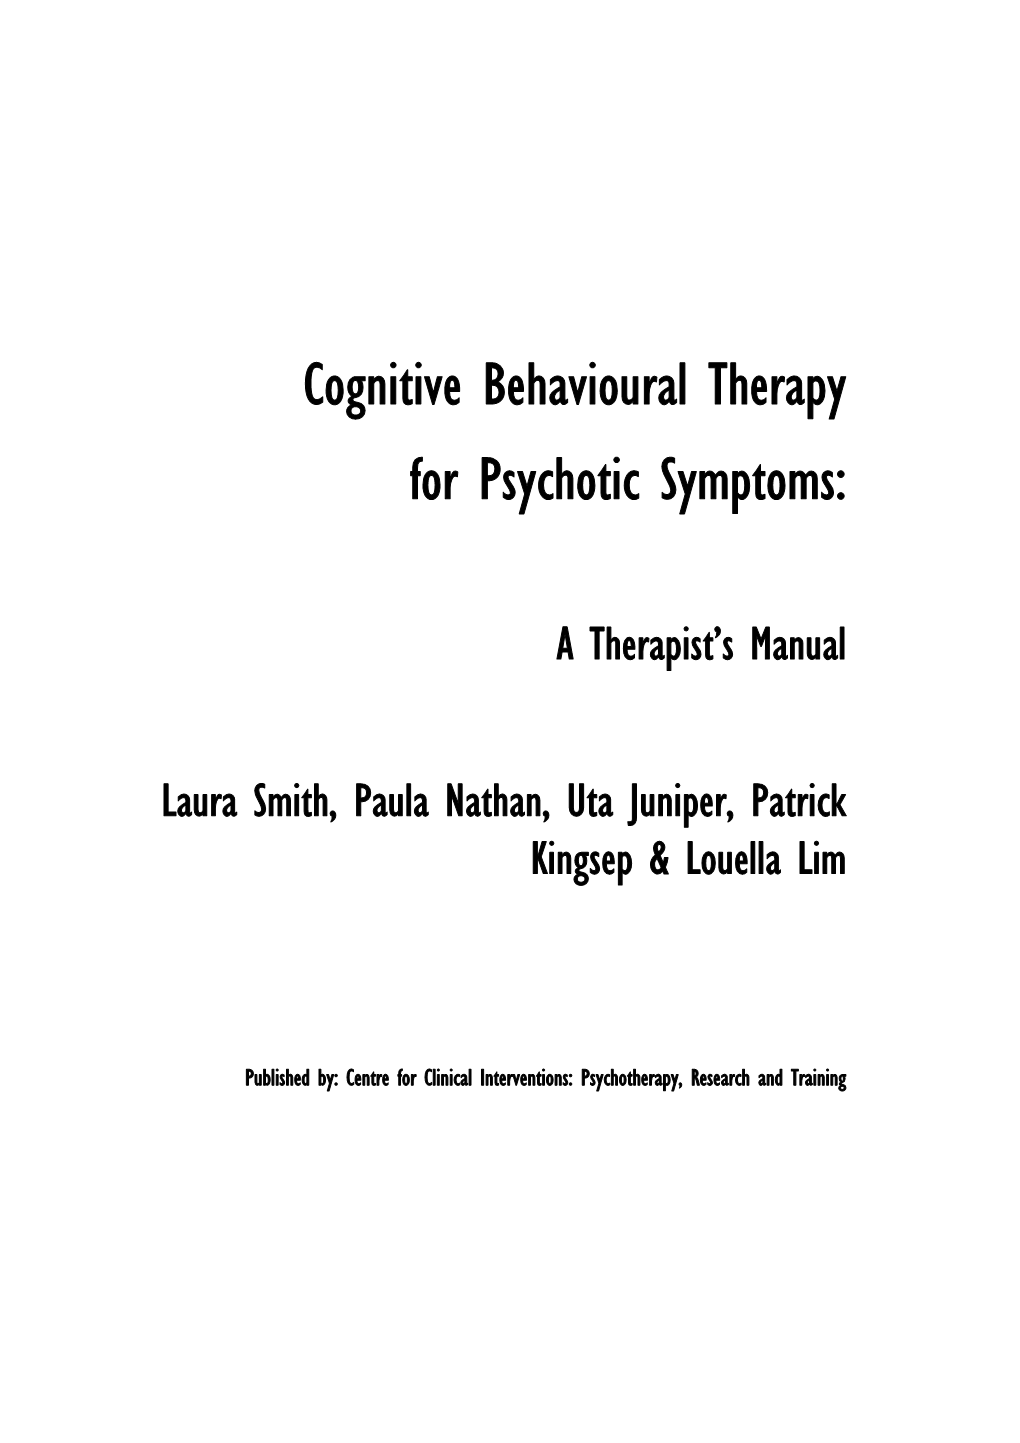 Cognitive Behavioural Therapy for Psychotic Symptoms